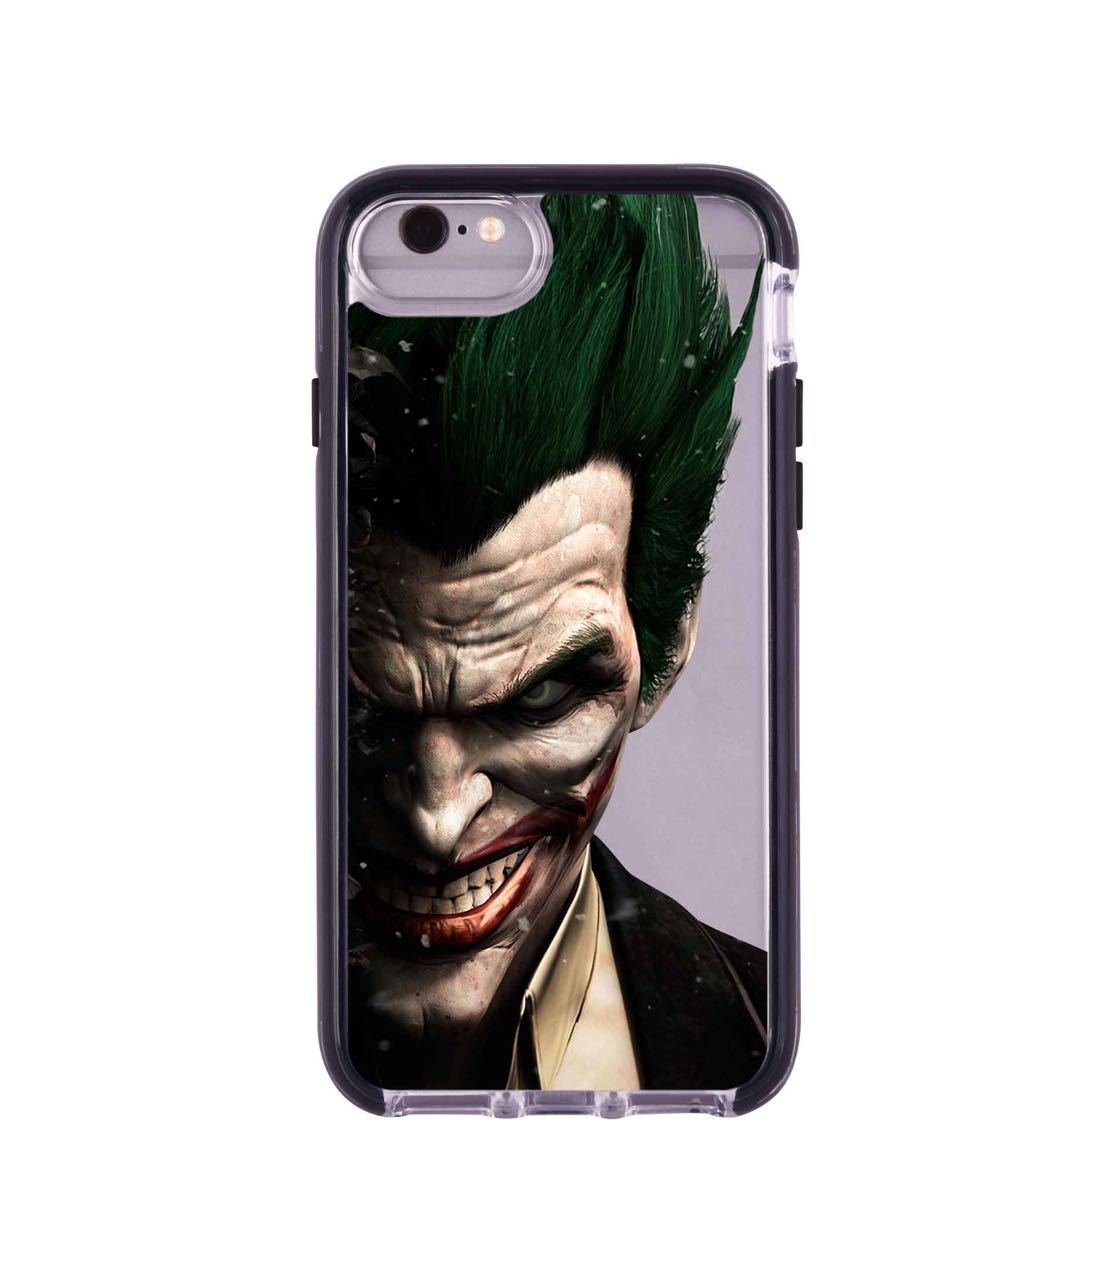 Joker Withers - Extreme Phone Case for iPhone 6S